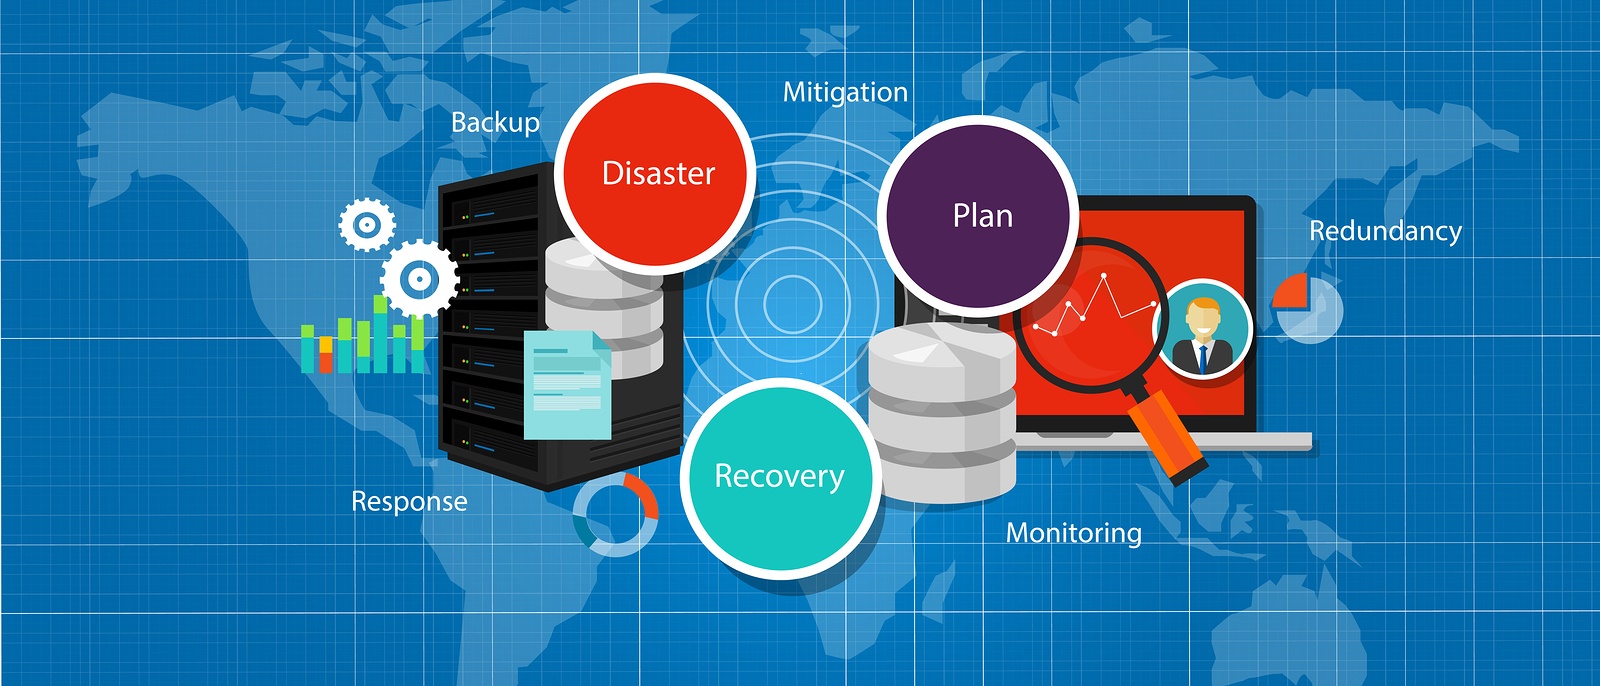 7 Questions Regarding Business Continuity and Disaster Recovery (BCDR) You Should Answer